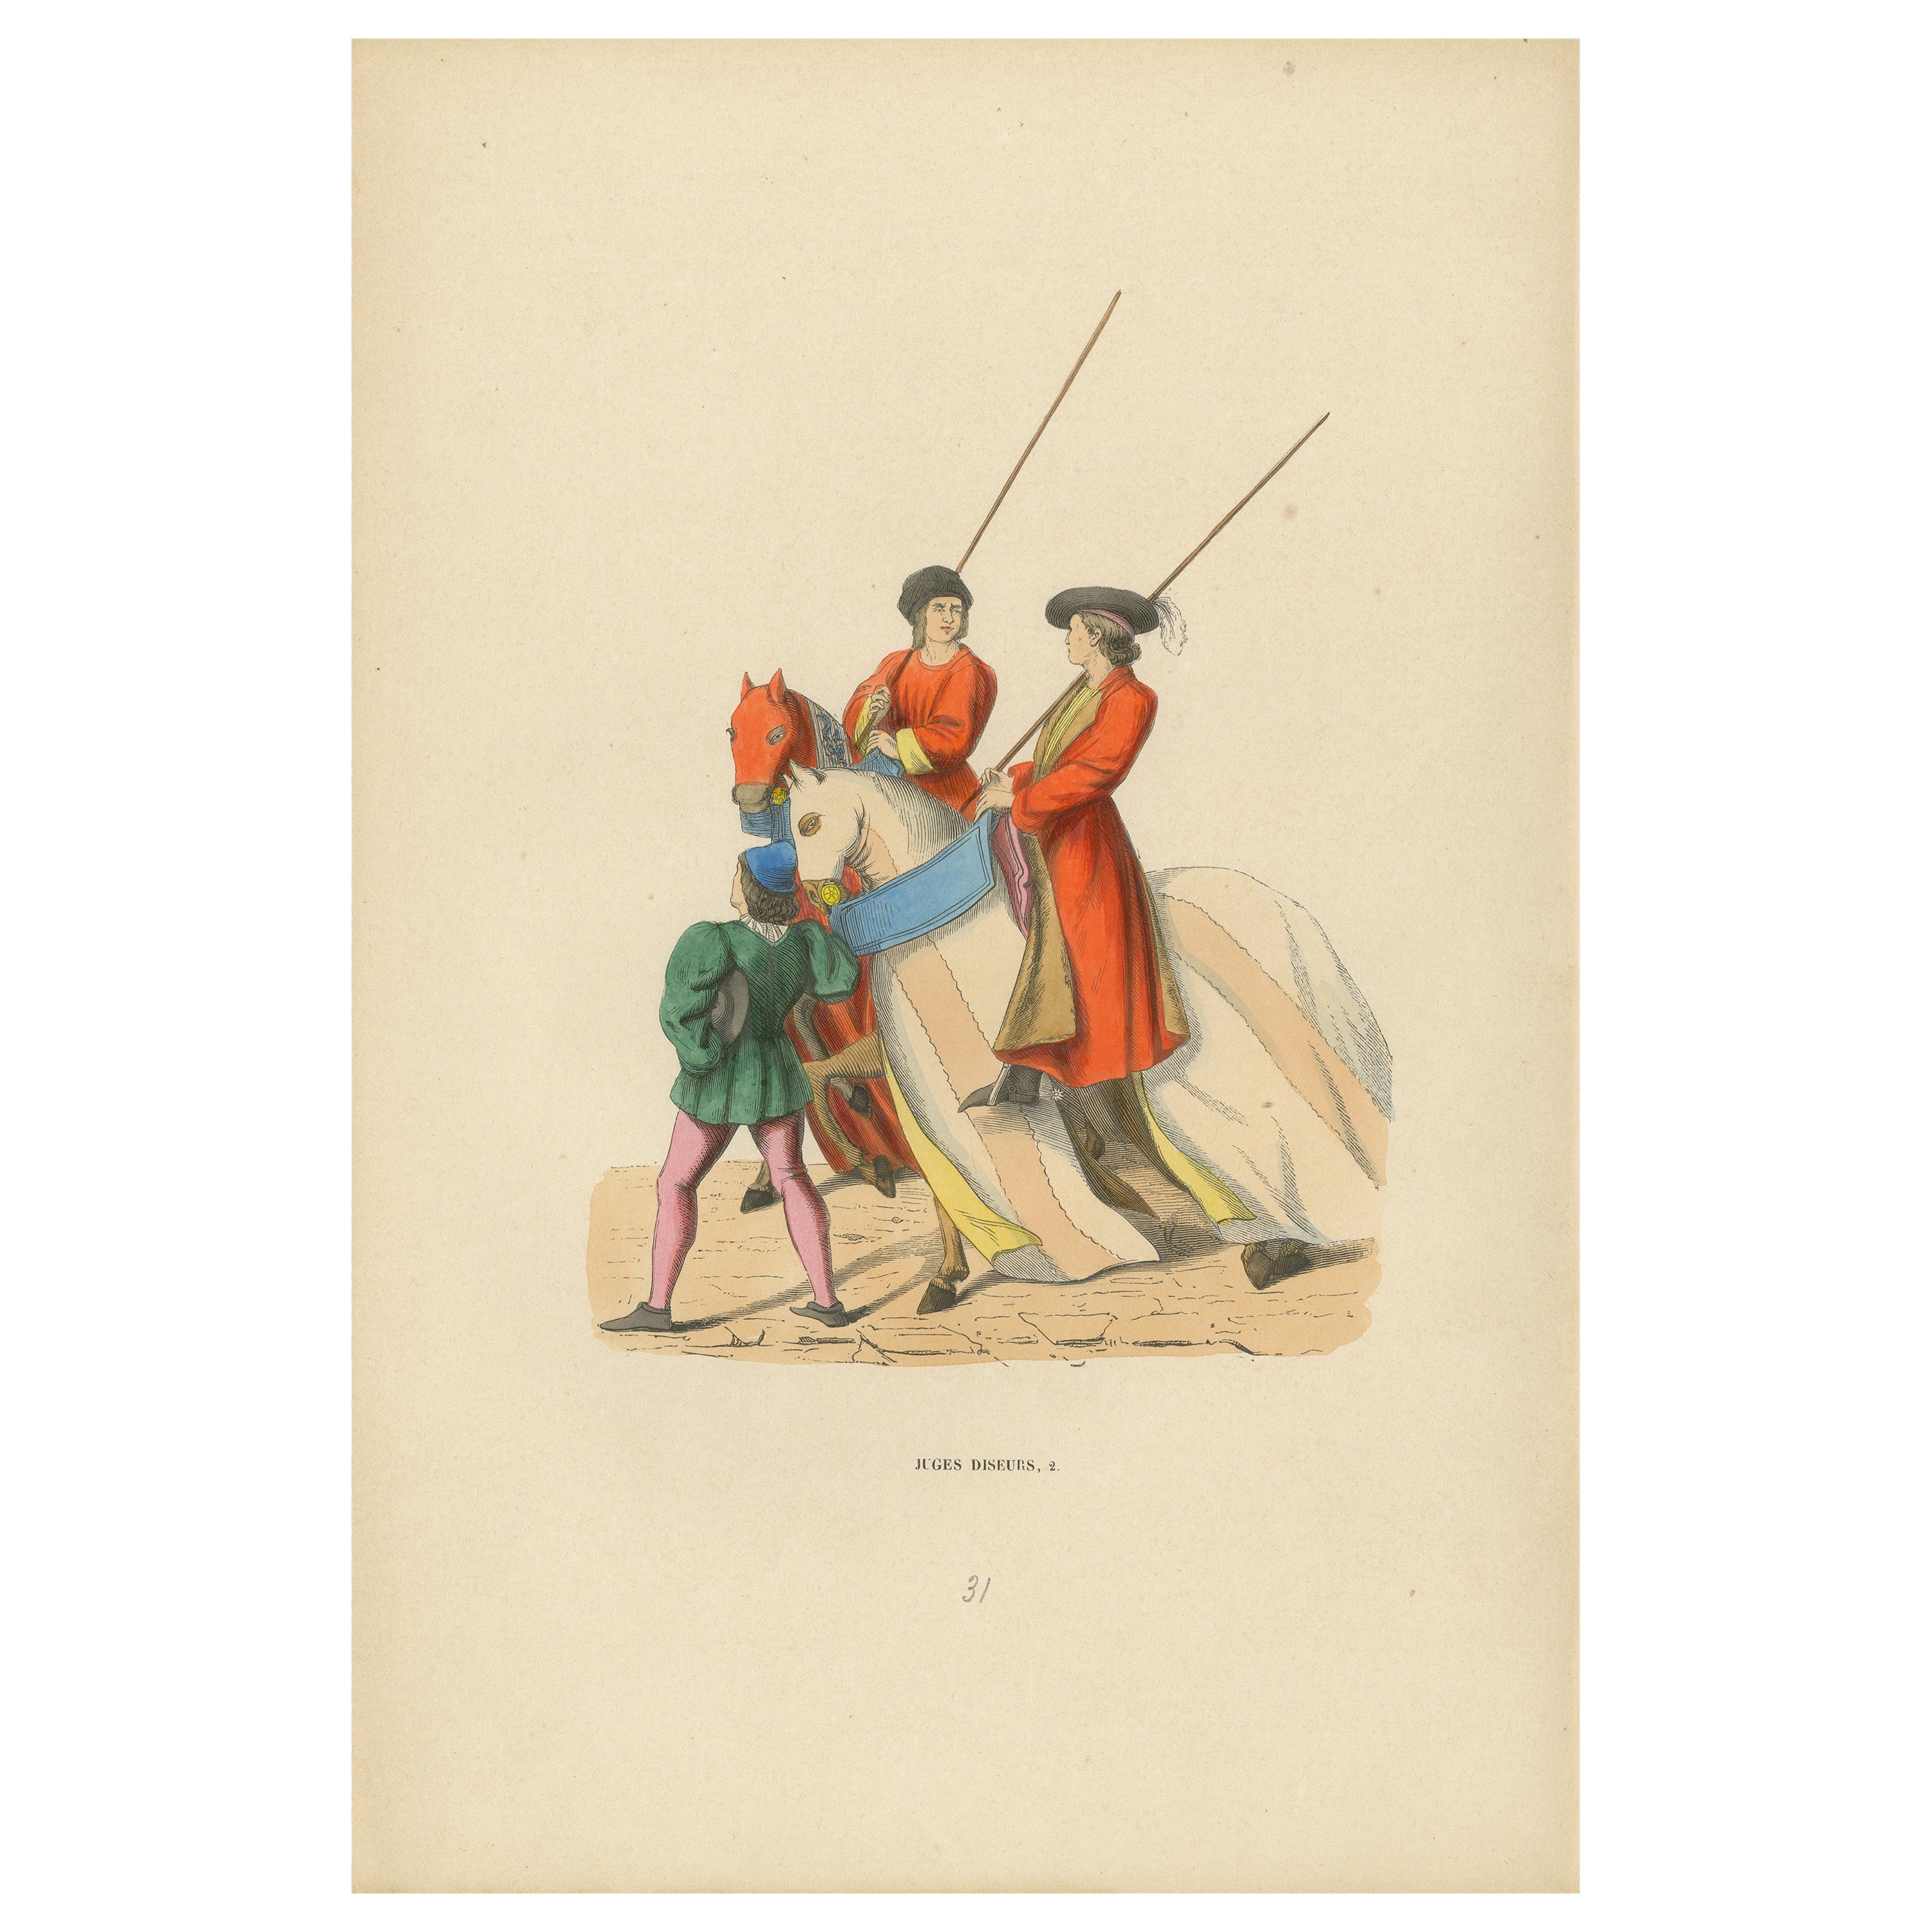 Ceremony of Judgment: Noblemen as Judicial Arbiters, 1847 For Sale